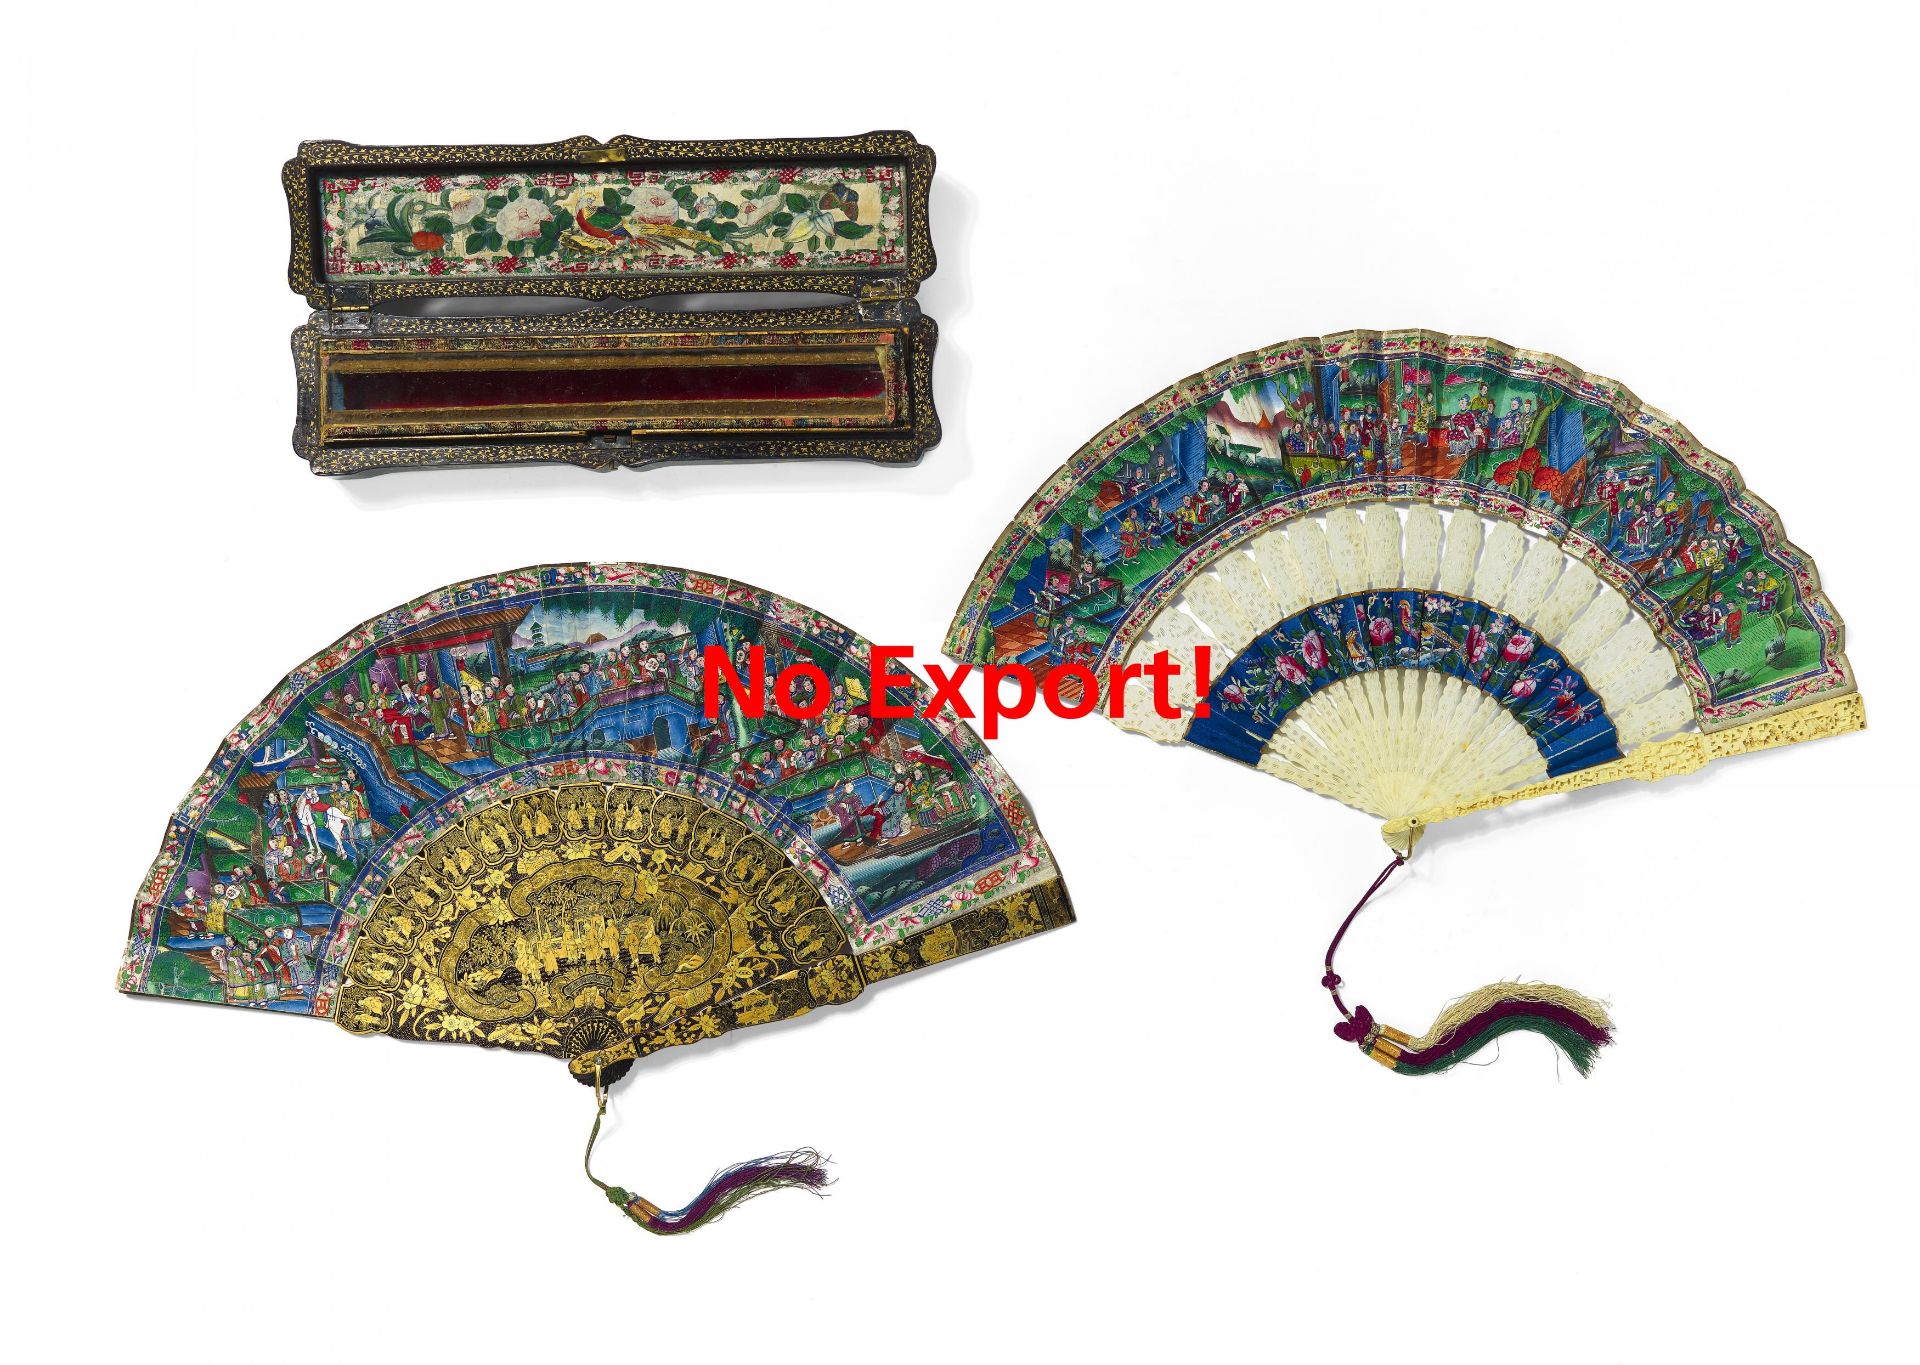 TWO FANS WITH GENRE SCENES, BIRDS AND FLOWERS. Origin: China. Dynasty: Qing dynasty. Date: Ca. 1870.